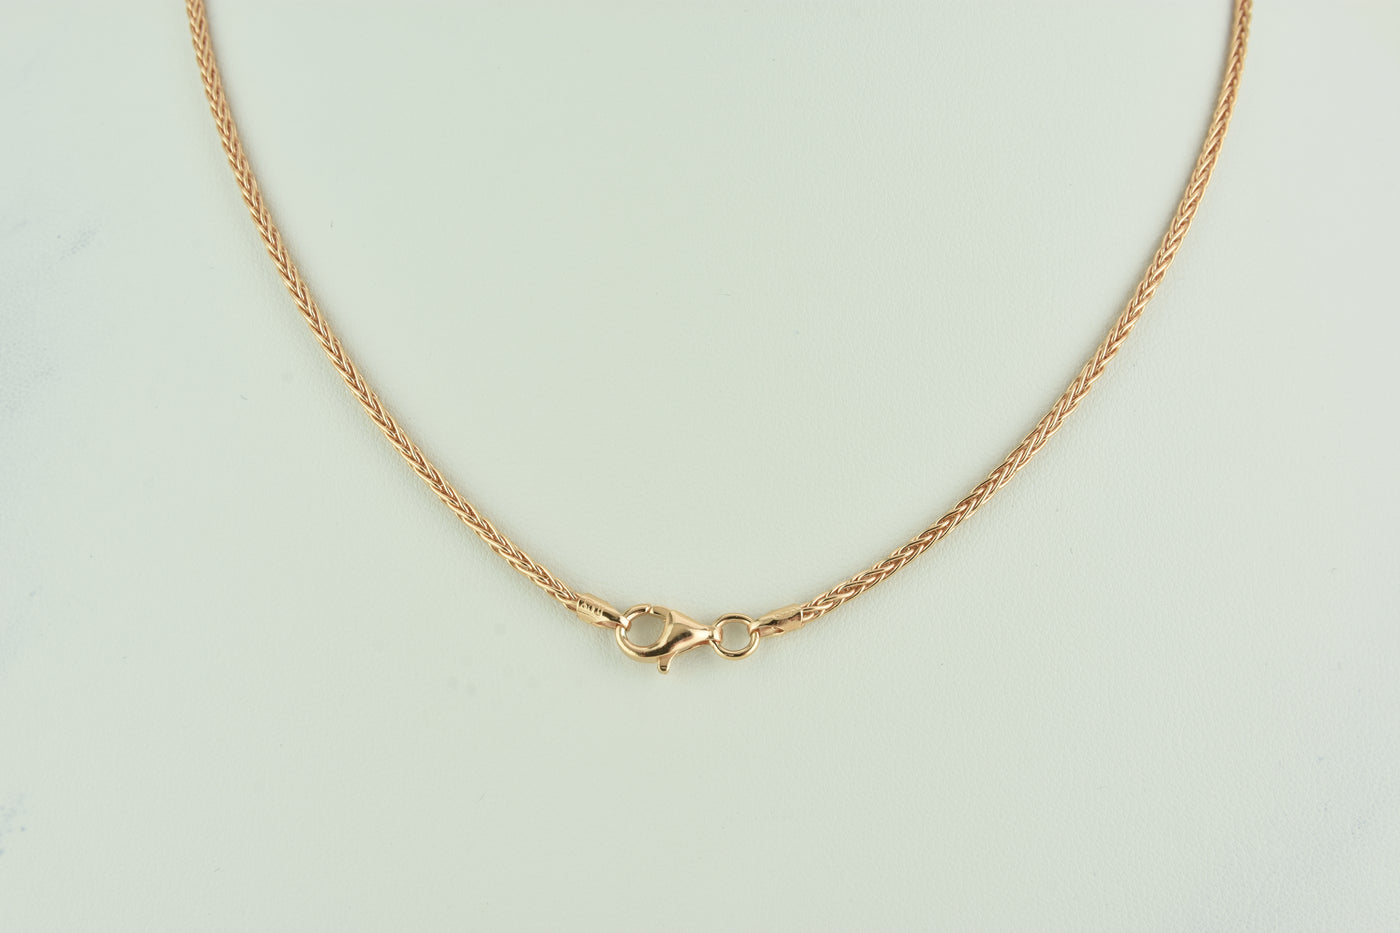 Italian Braid Sterling Silver Chain with Rose Gold Plate